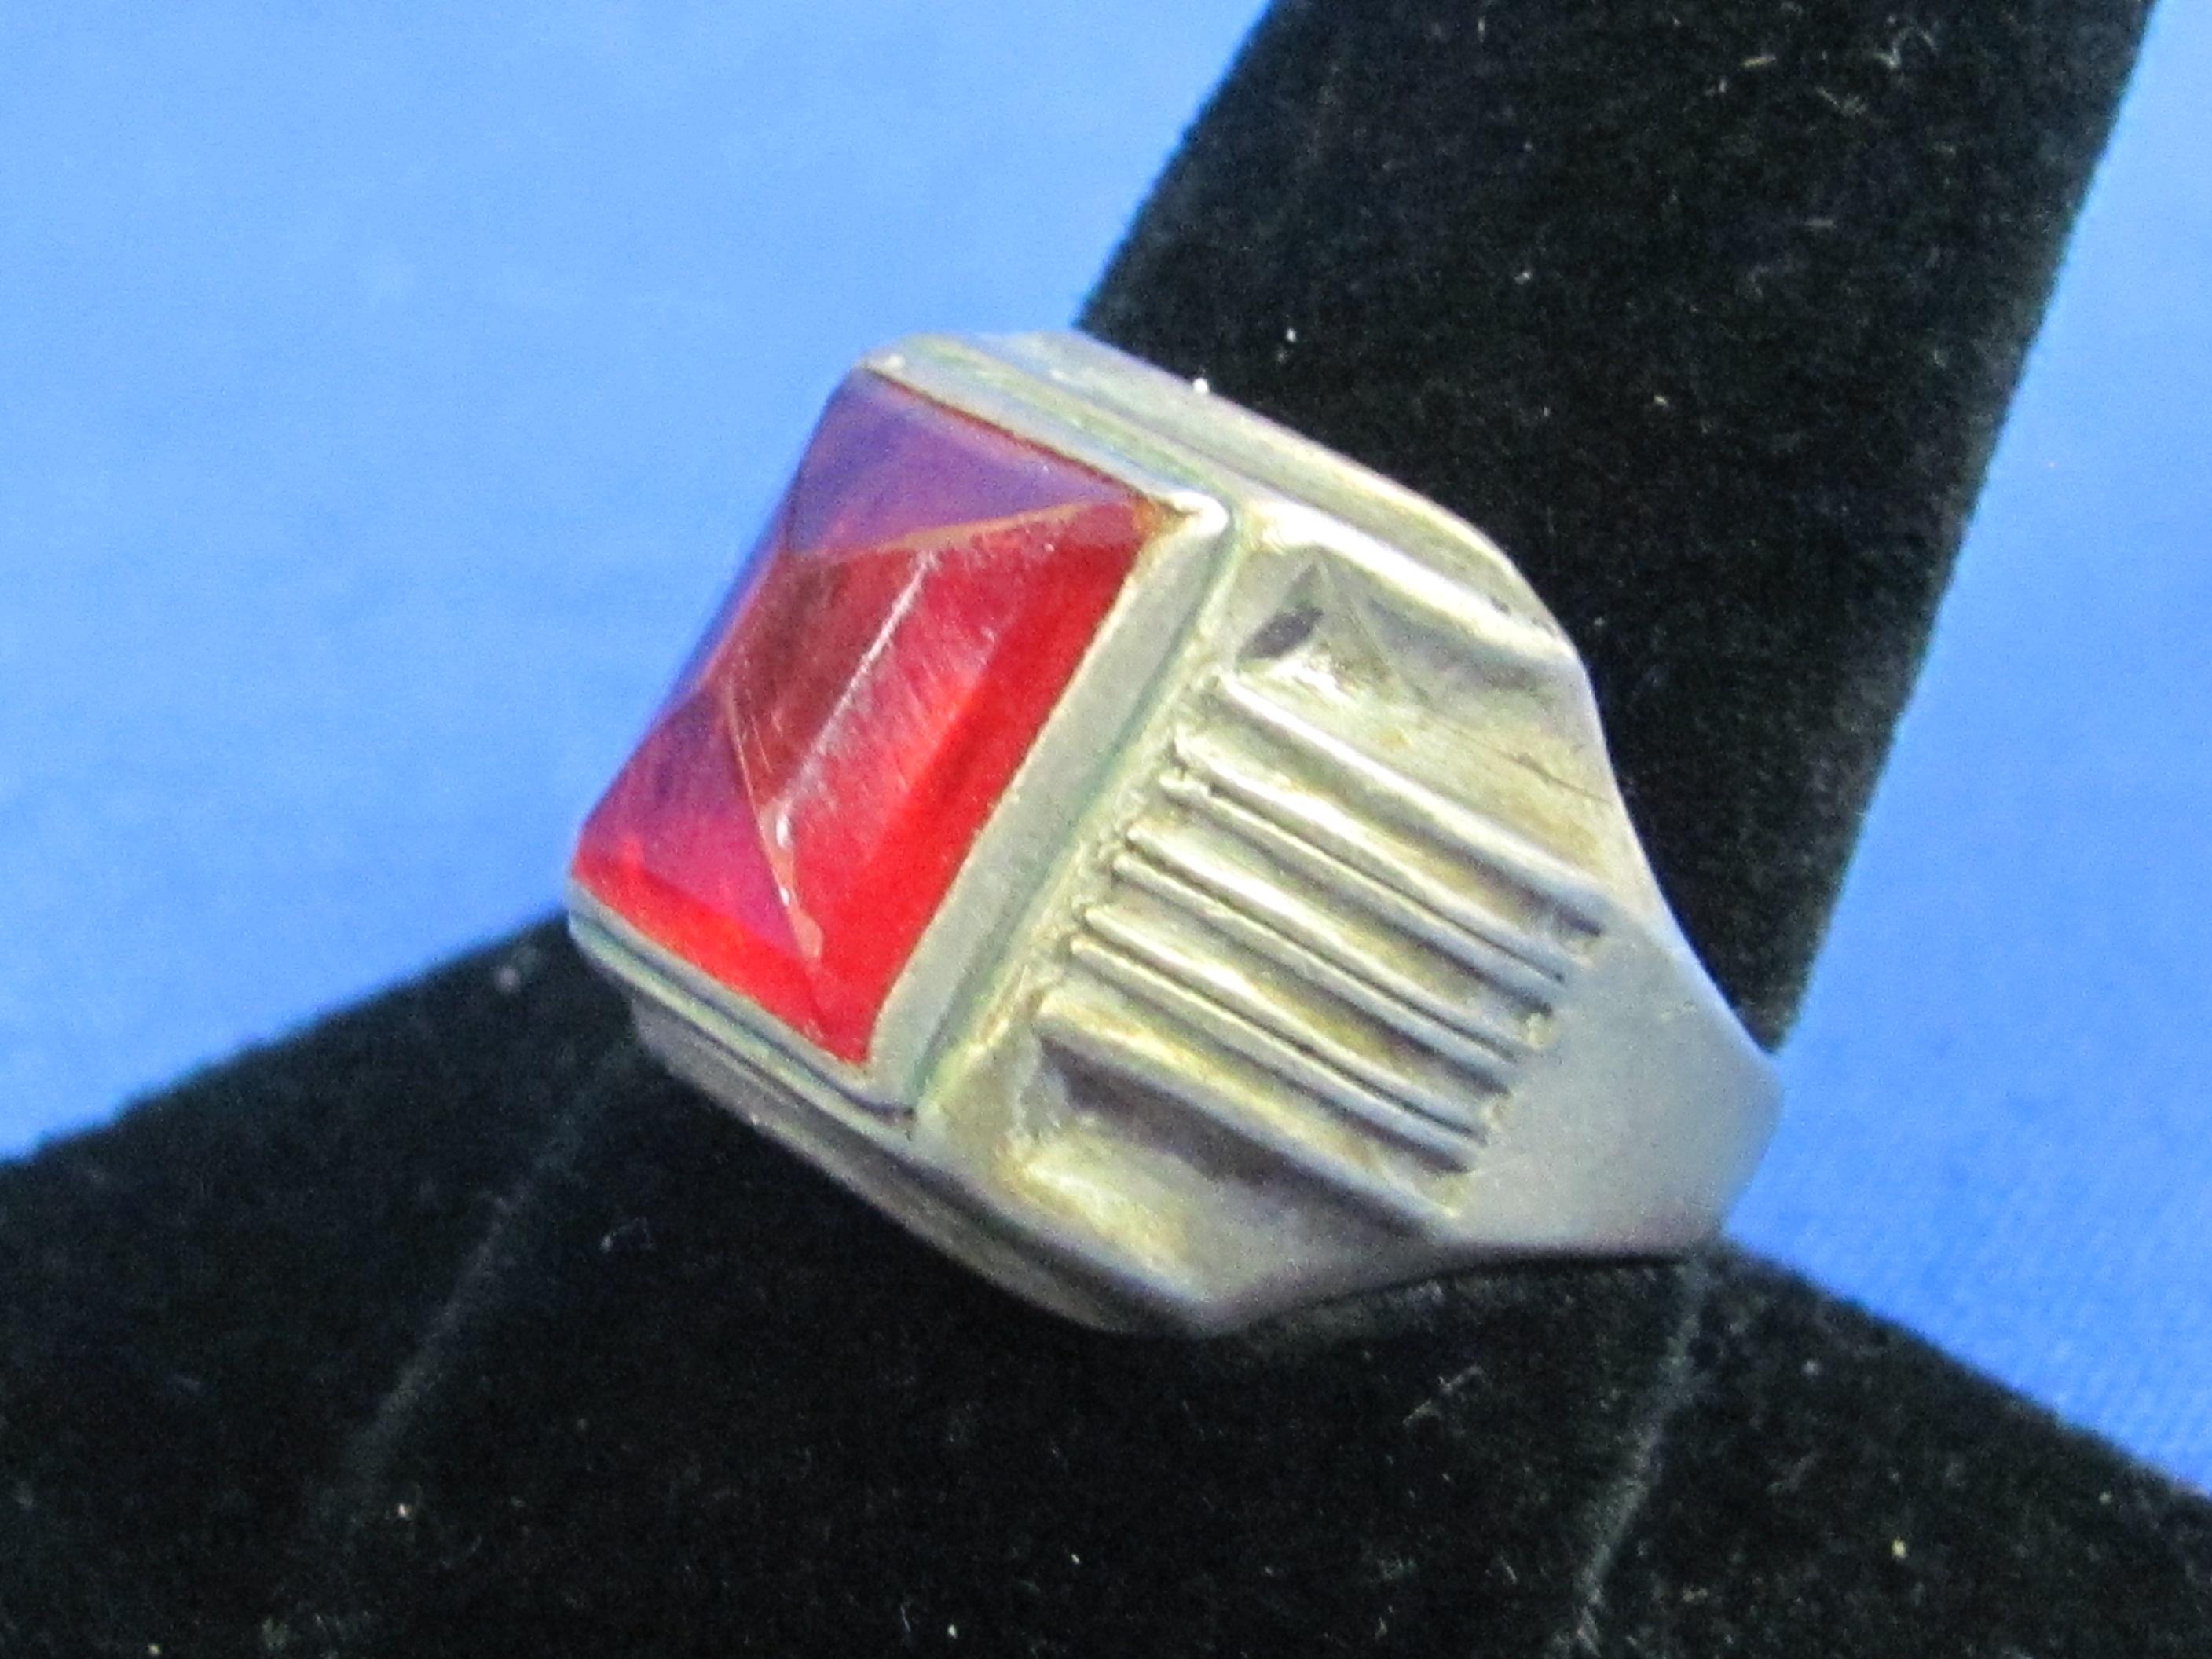 Vintage Sterling Silver Ring with Red Stone – Size 9.5 – Total weight is 6.1 grams